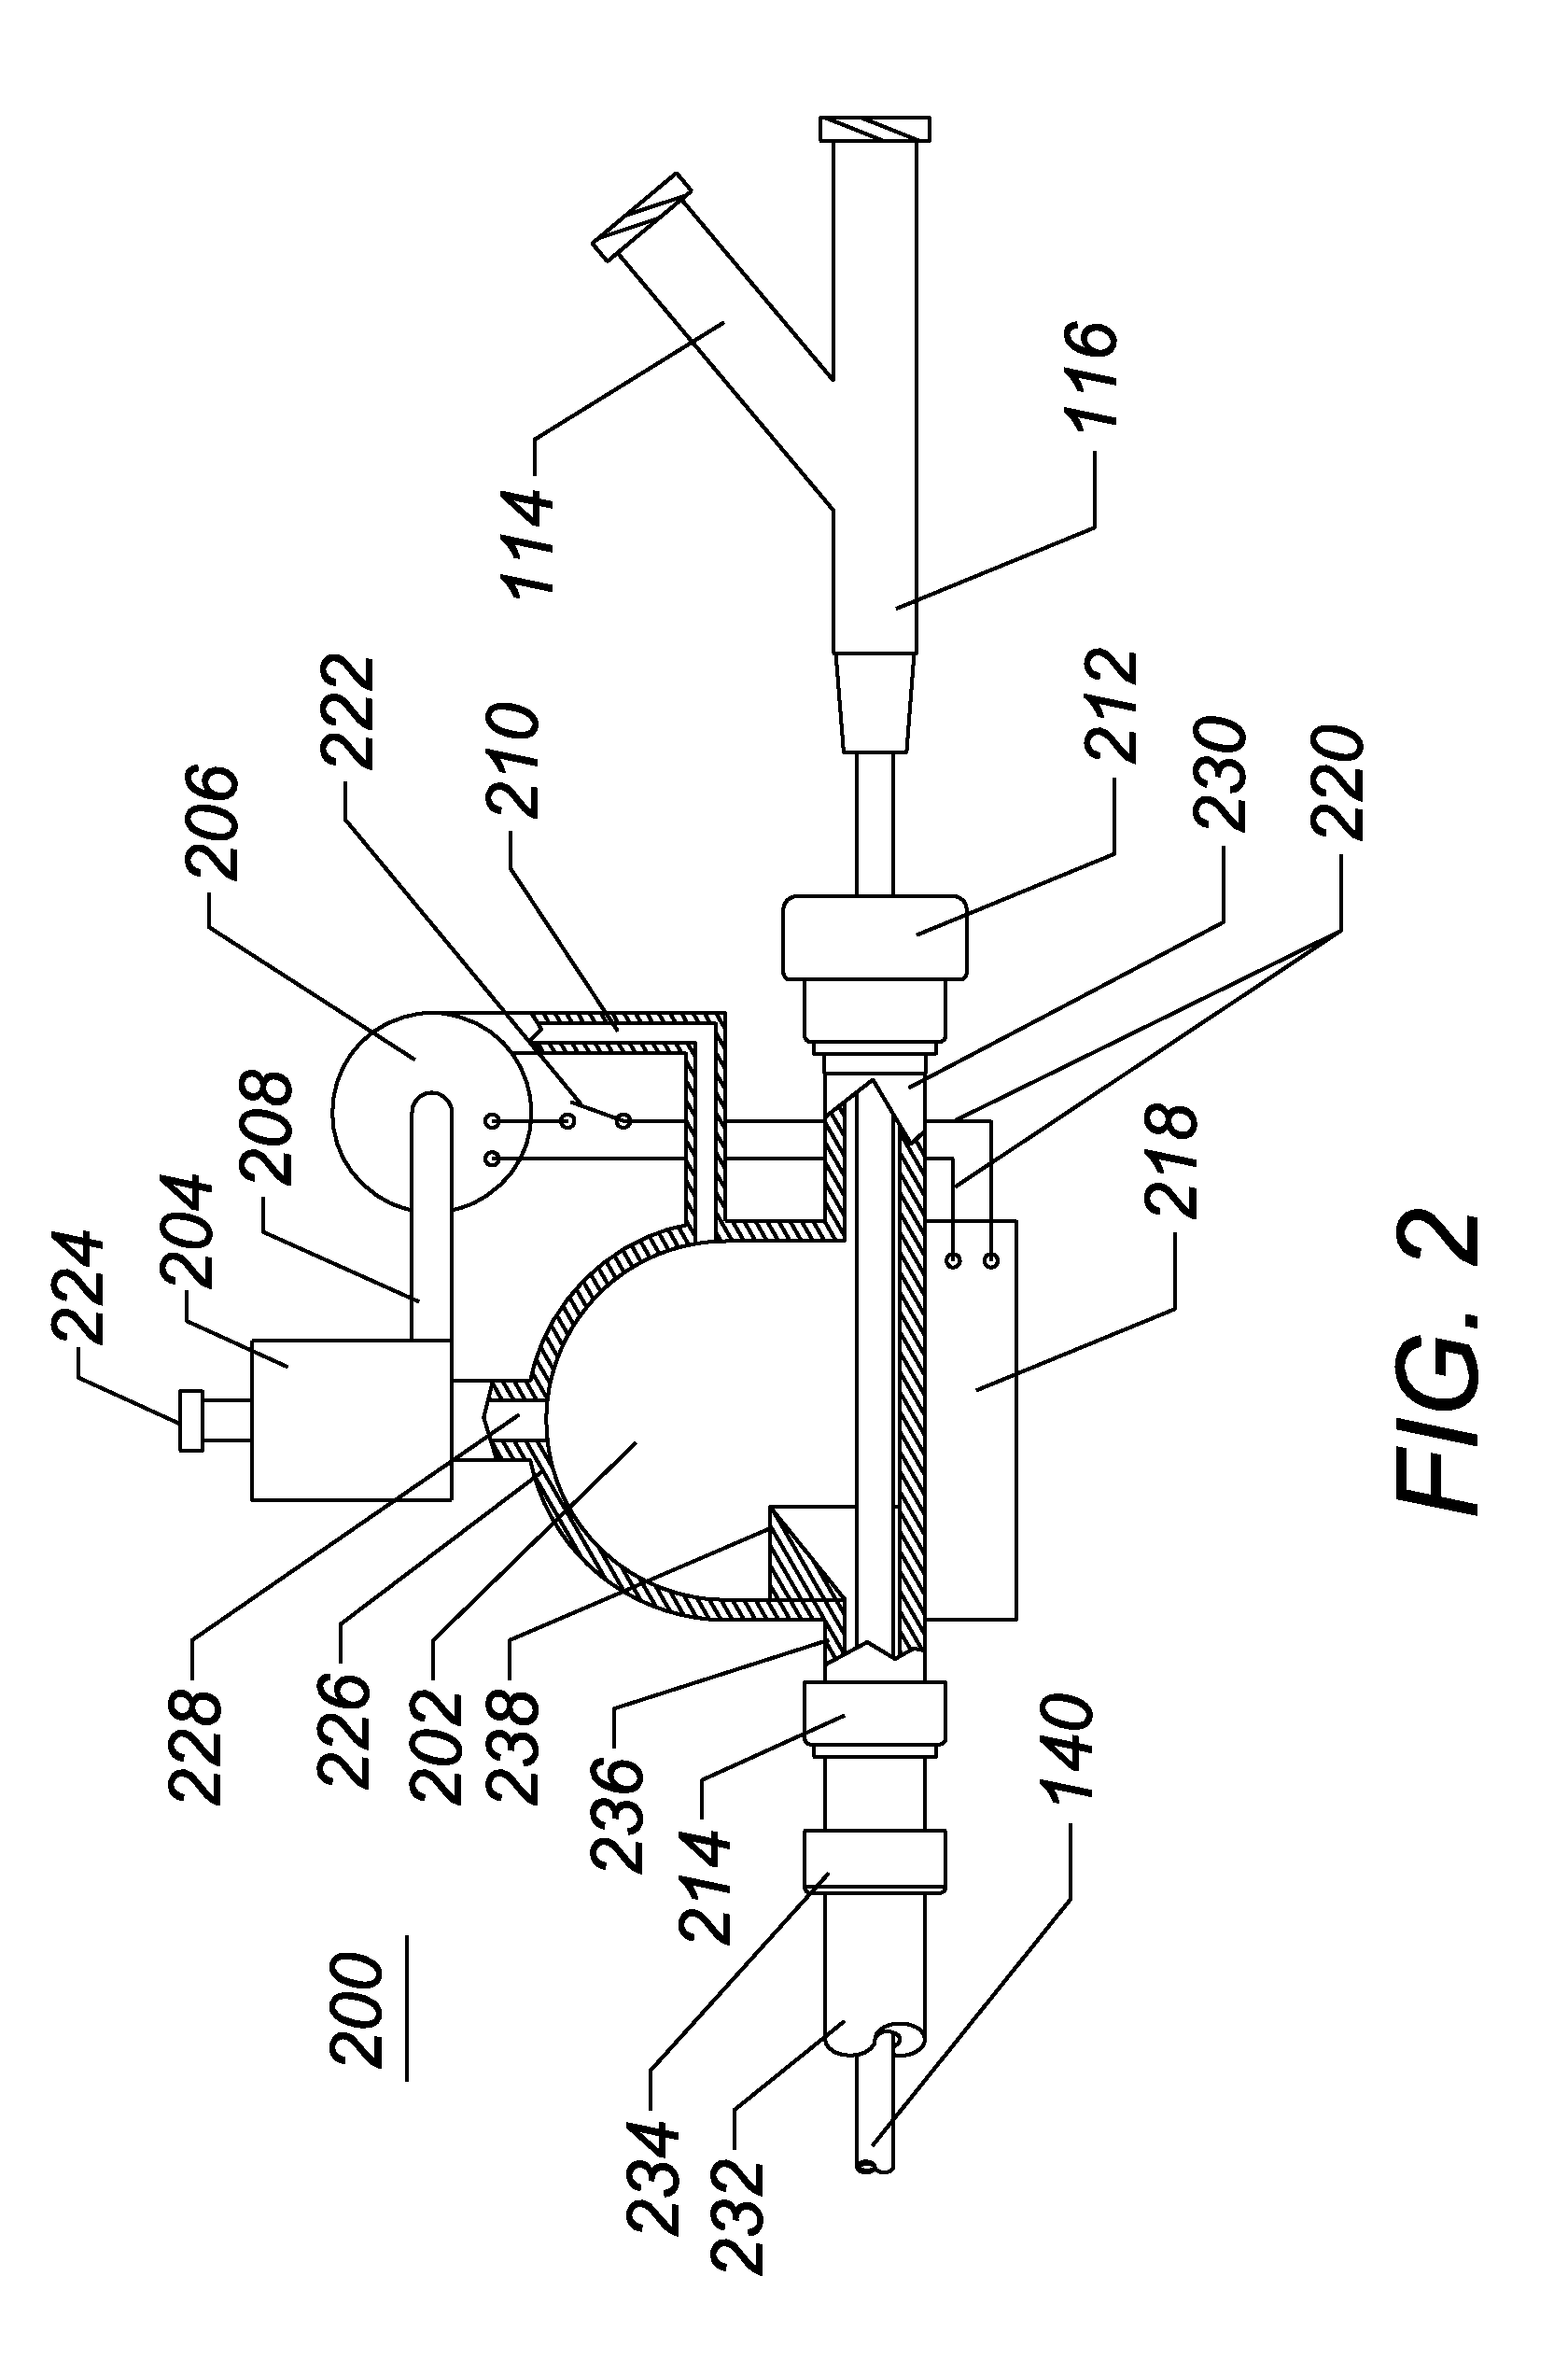 Method and Apparatus for Prevention of Catheter Air Intake